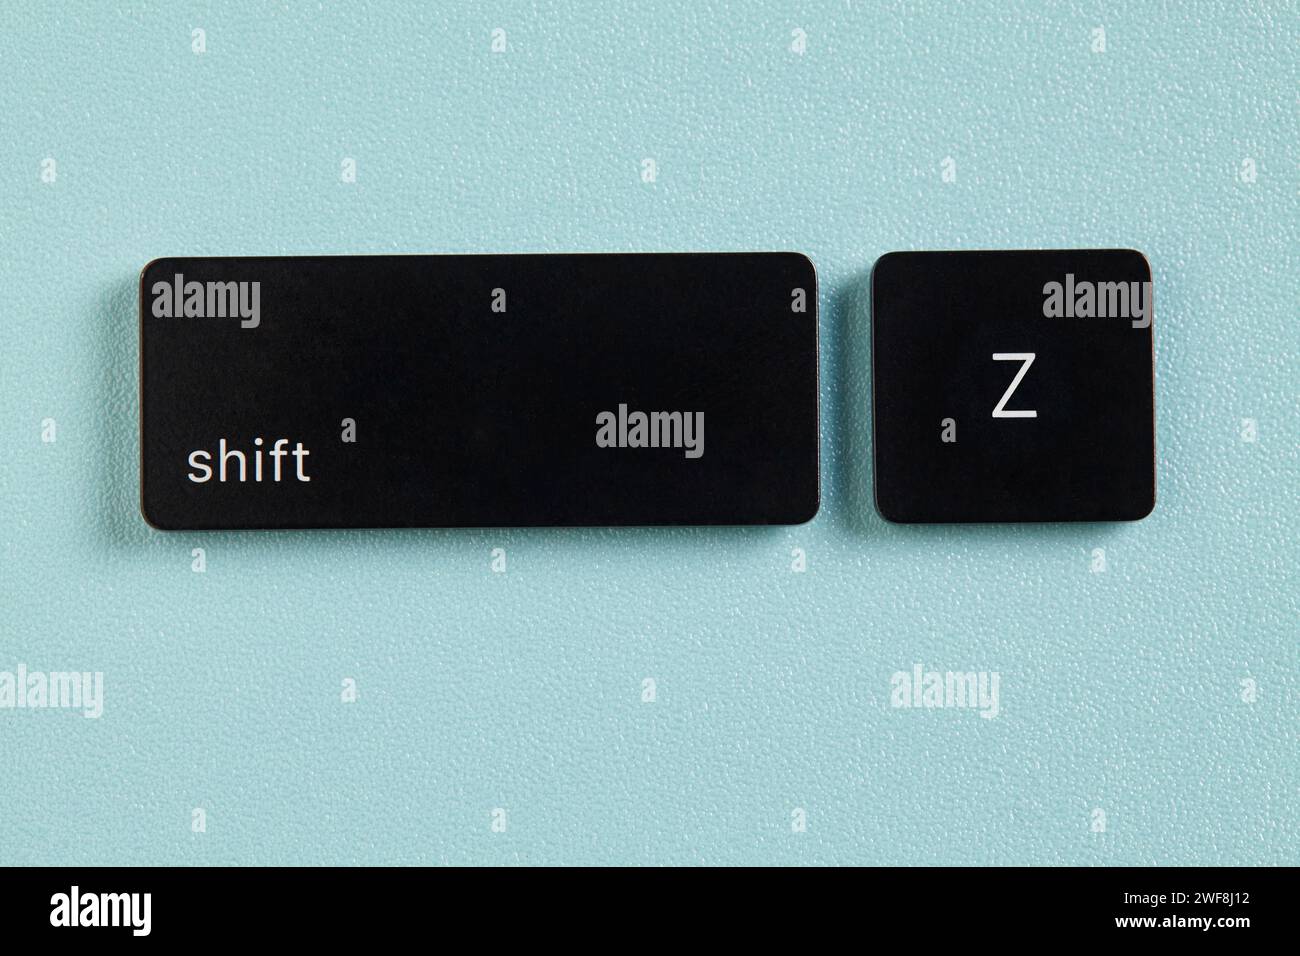 Shift key and Z key detached from keyboard on blue background Stock Photo